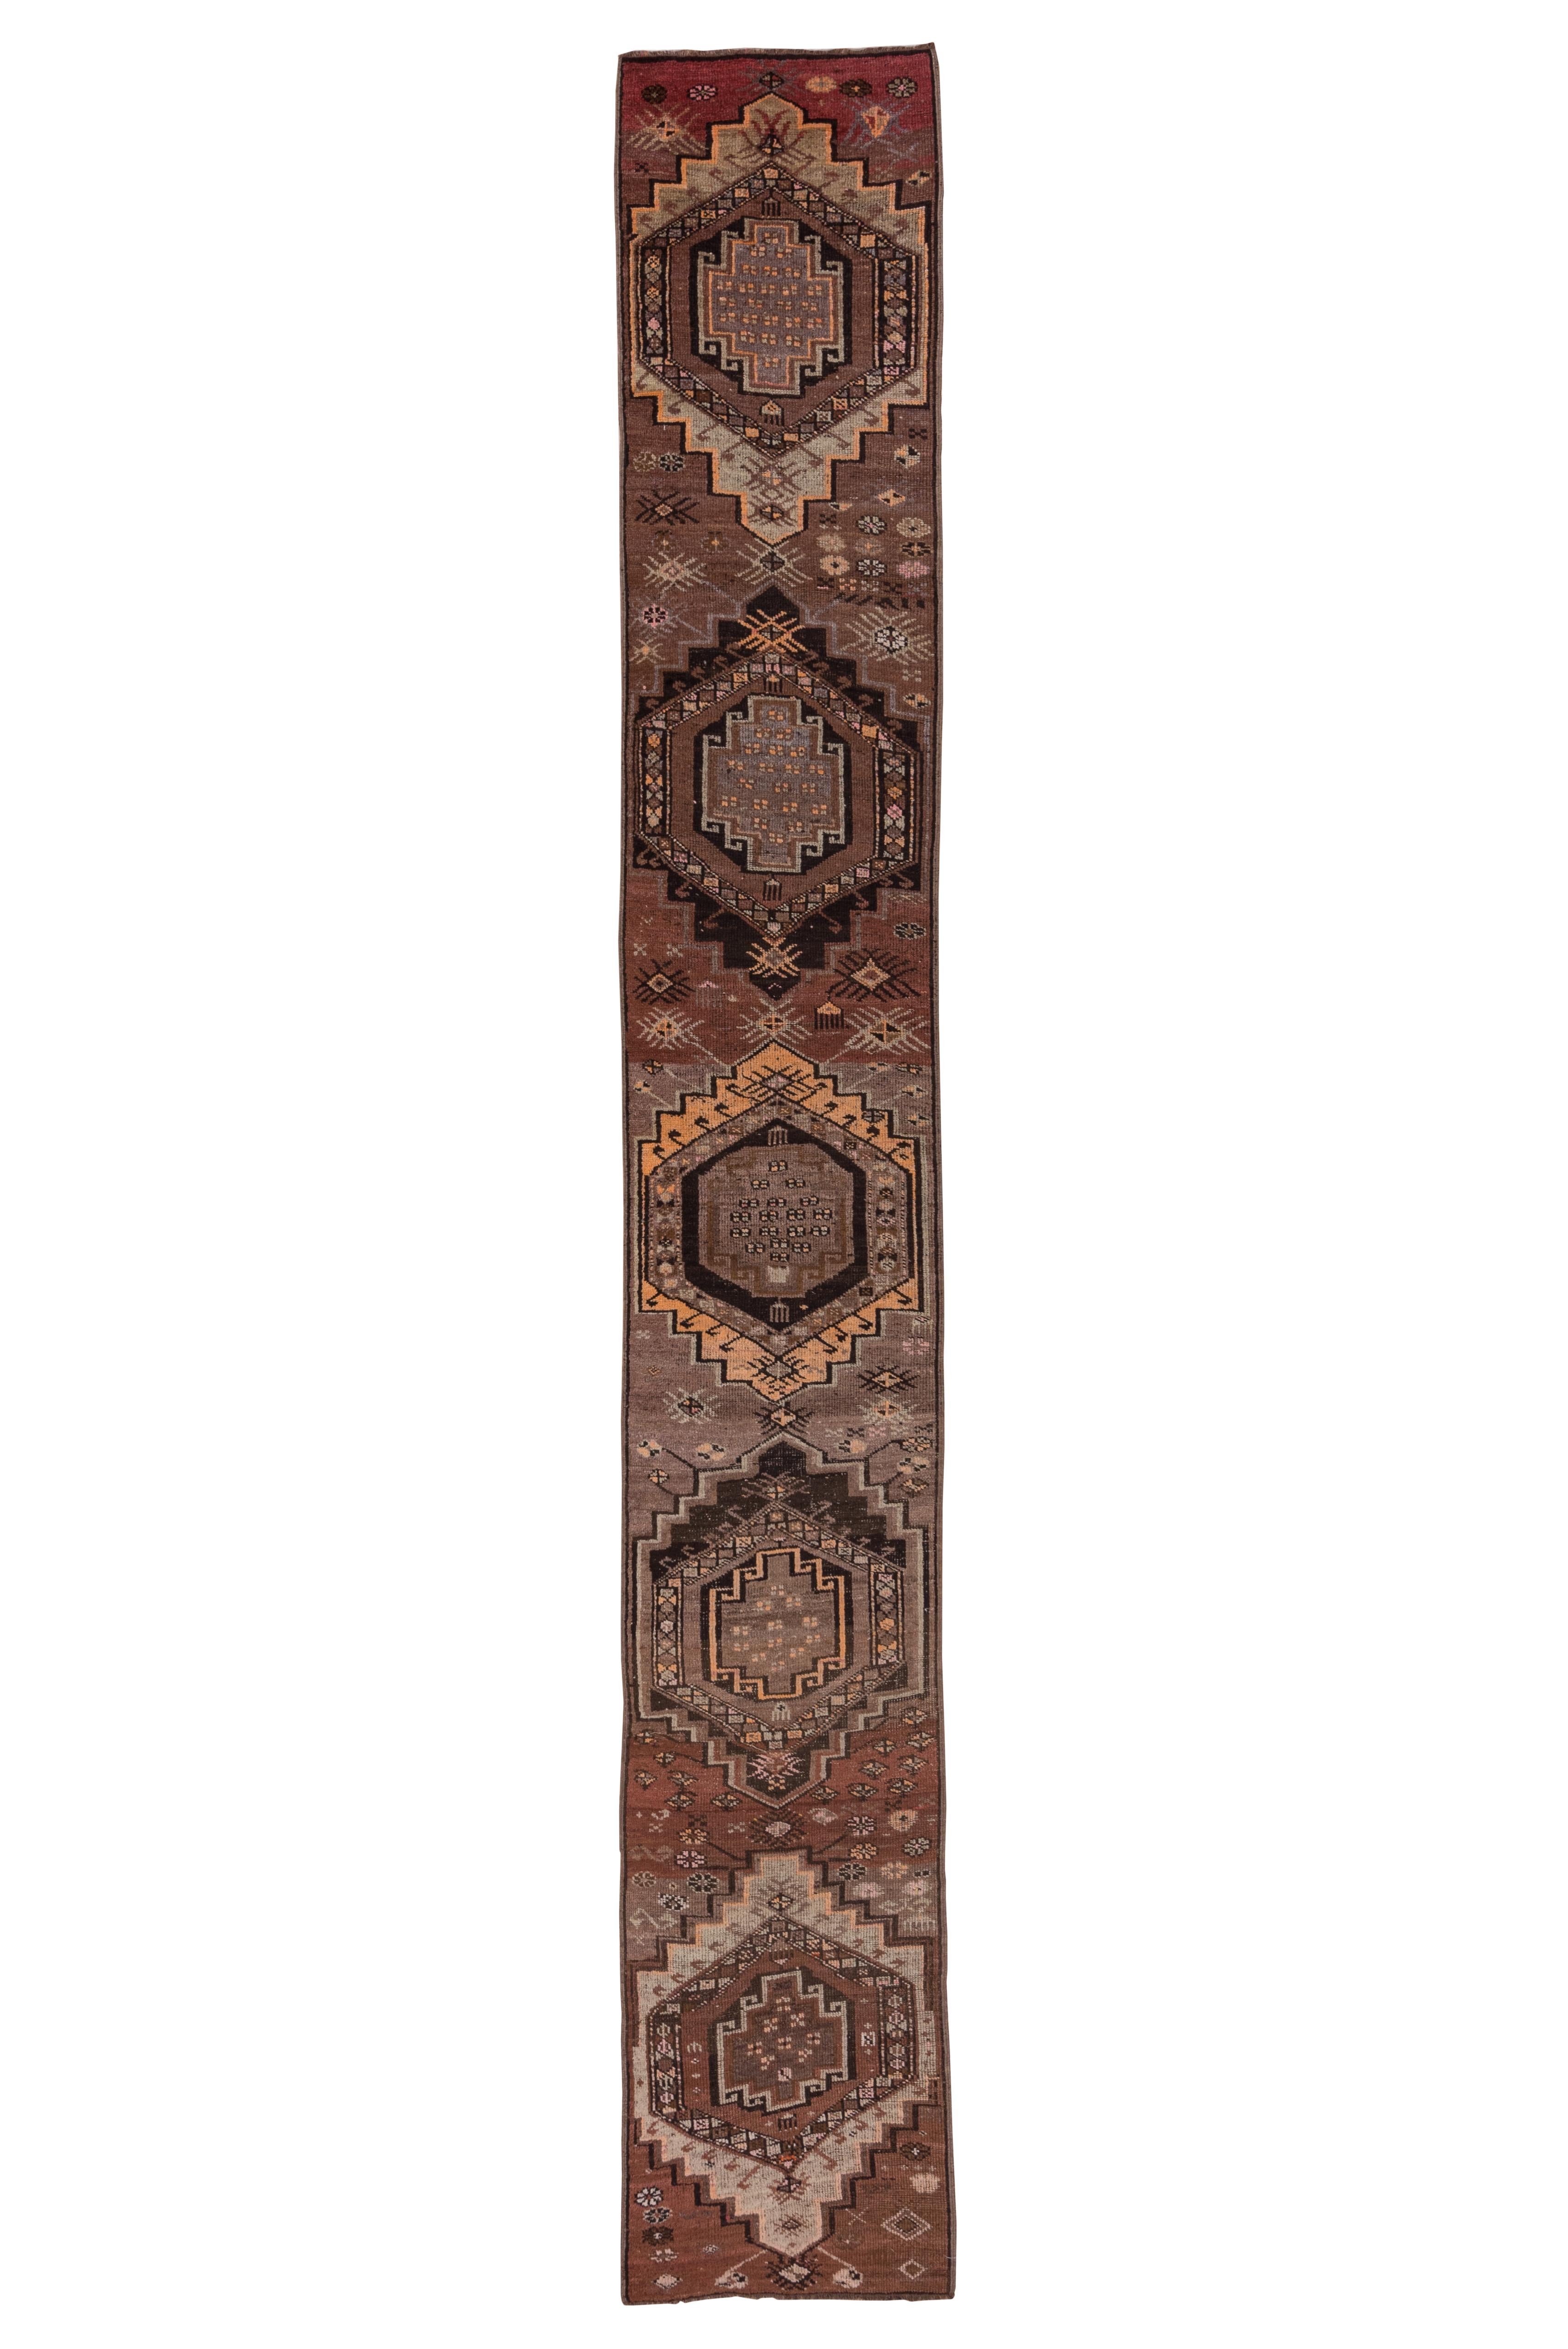 This coarse/moderate weave eastern Turkish runner shows a visibly abrashed coral field displaying four very large hooked and nested hexagonal medallions detailed in green, straw, coral, ecru and ruby. Secondary small rayed motives. Lacking borders